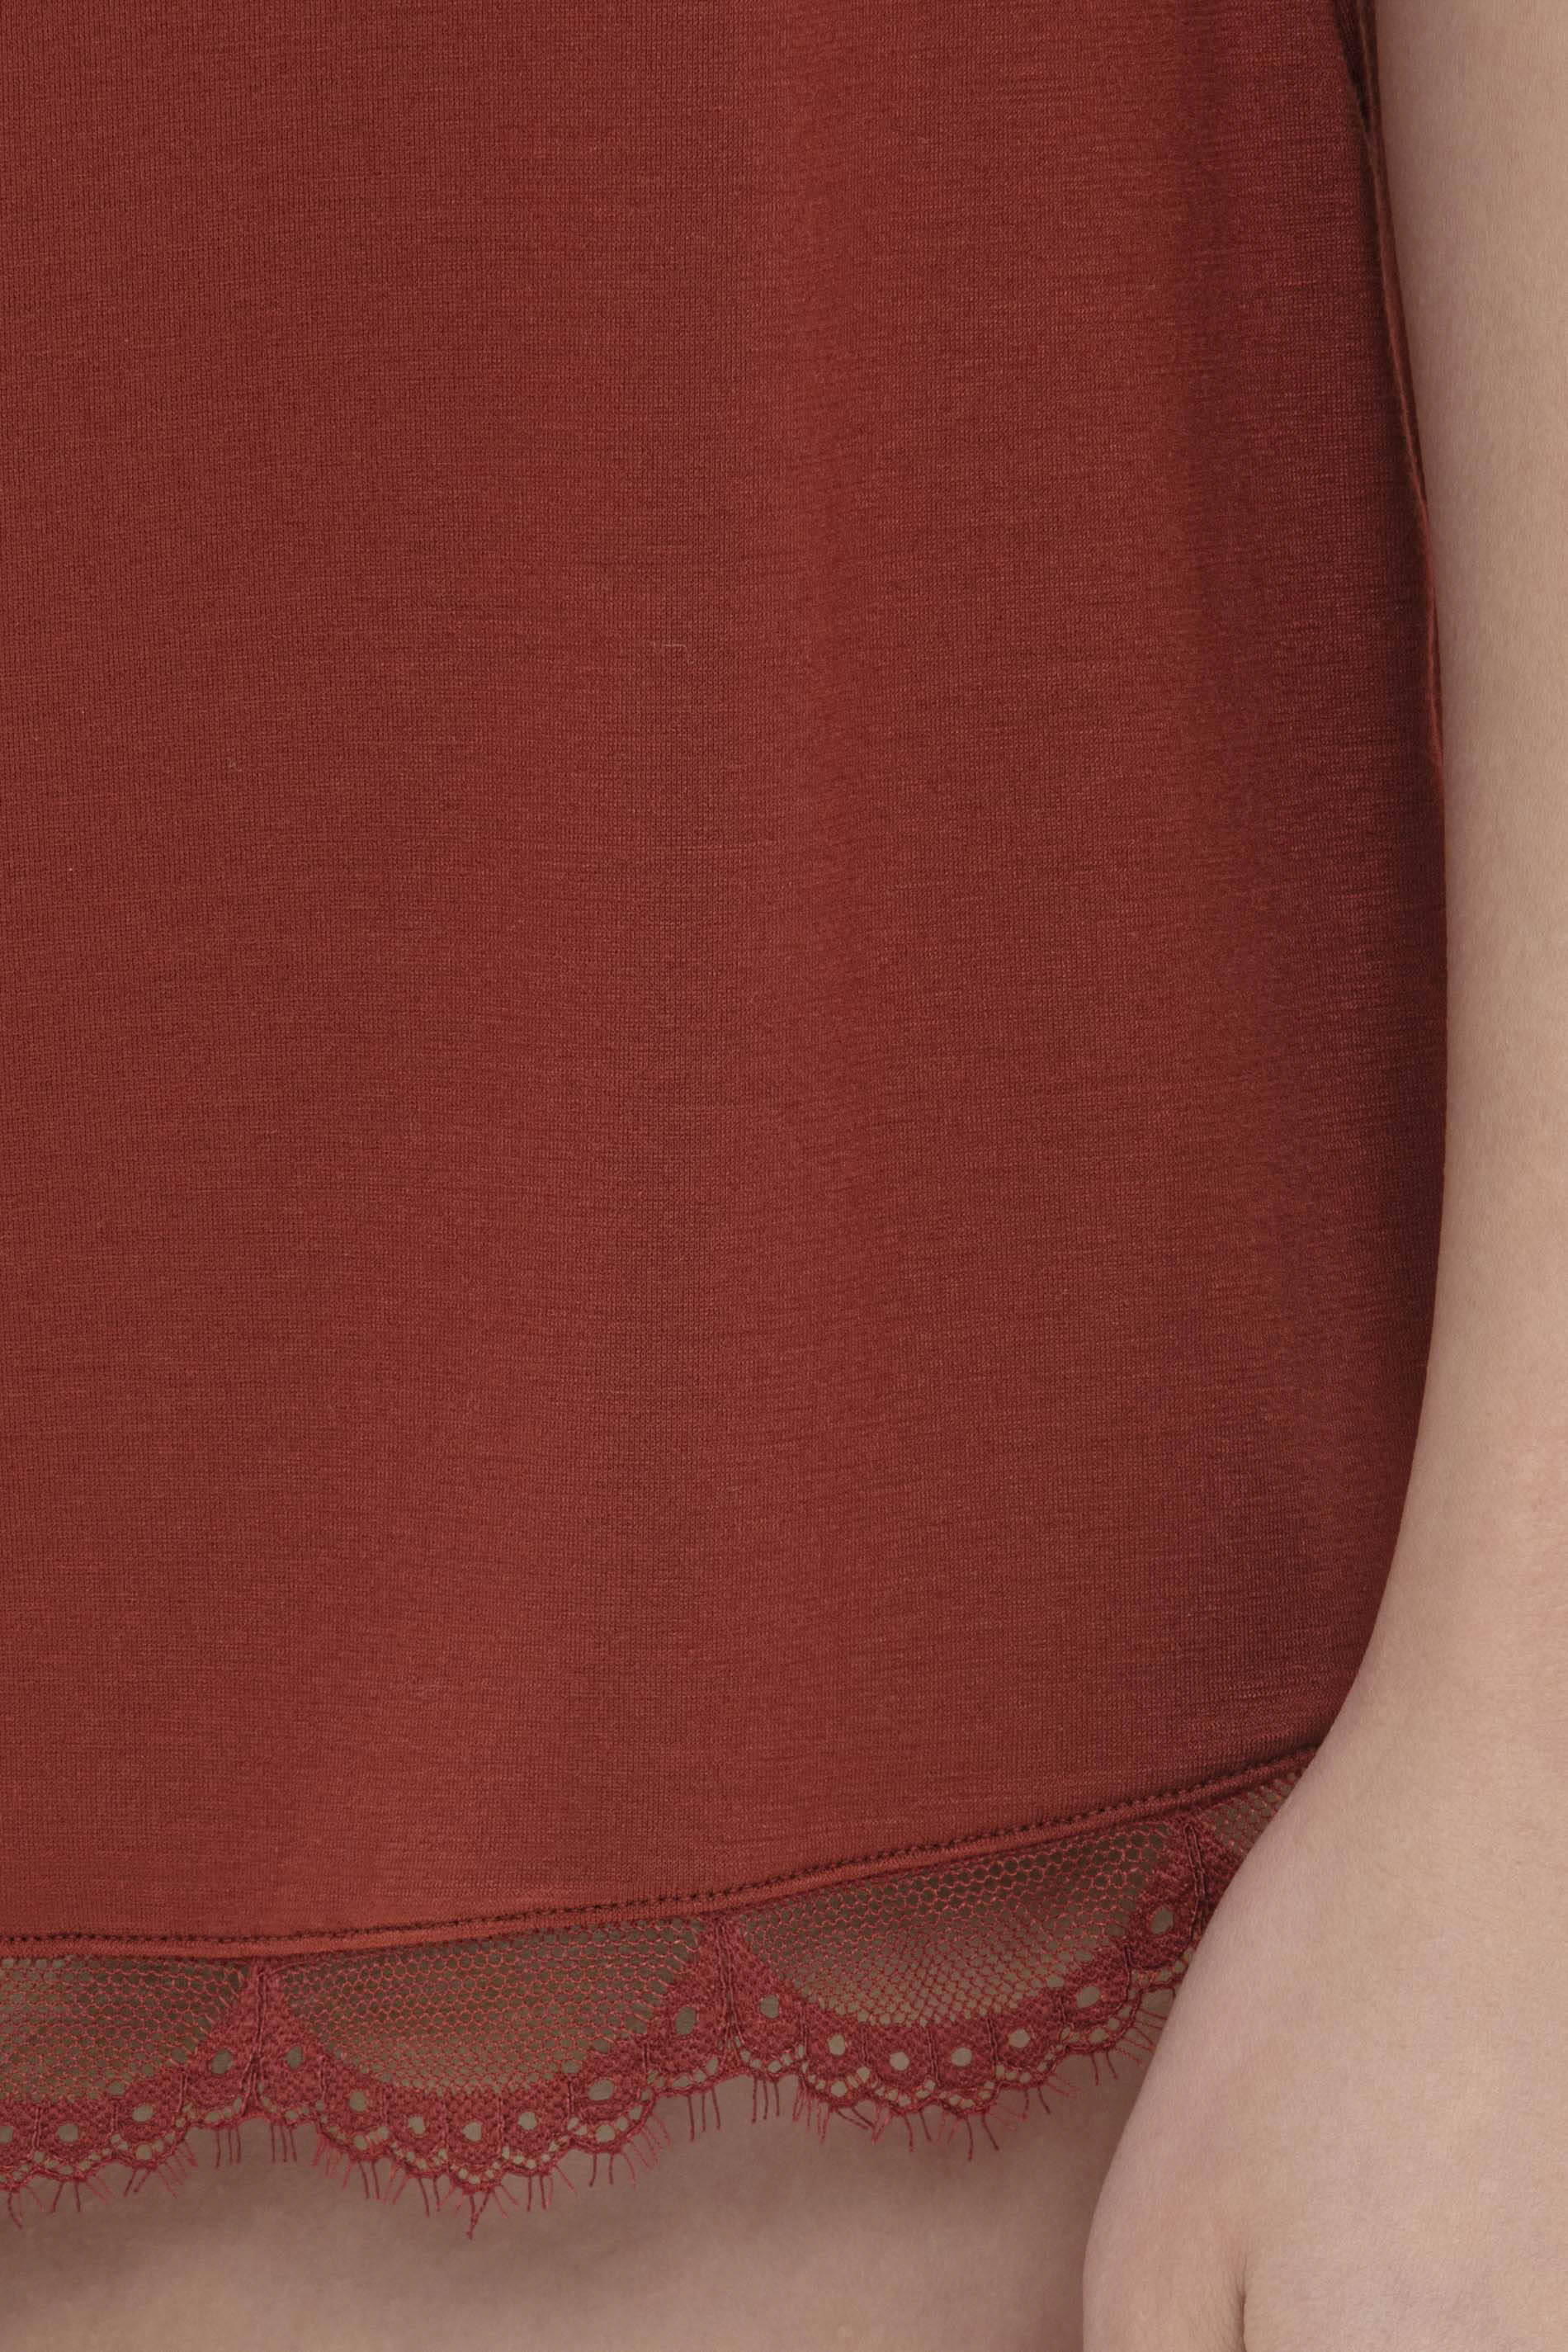 Camisole Red Pepper Serie Ilvy Detail View 02 | mey®